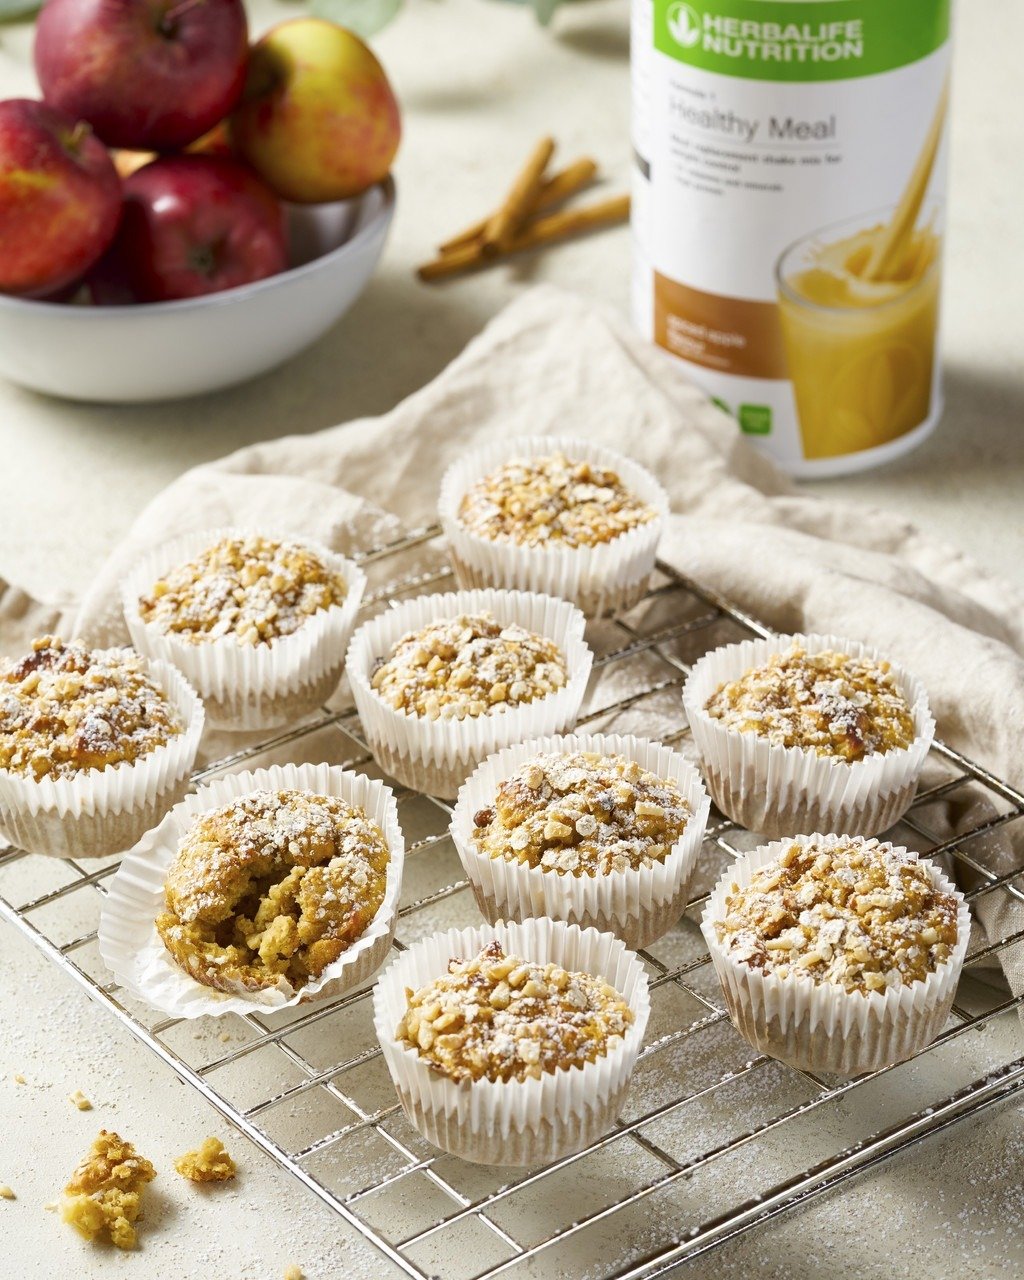 Protein muffins with apple and Formula 1 Spiced Apple